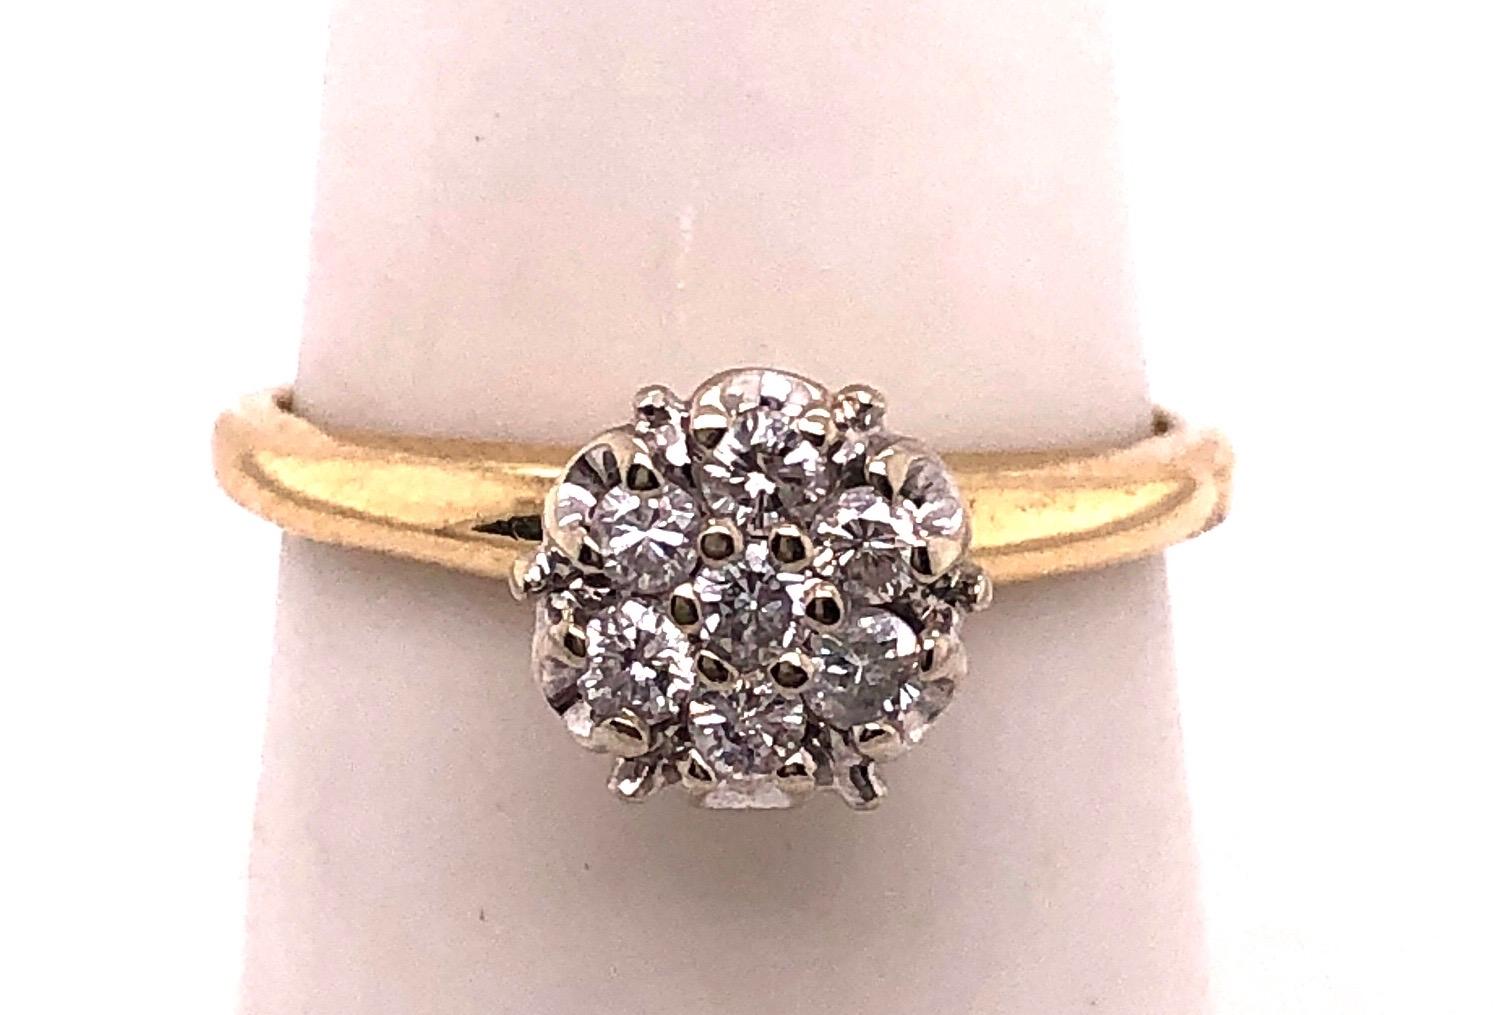 14 Kt Two Tone Gold Contemporary Diamond Cluster Engagement Ring 0.40 TDW.
Size 7
3 grams total weight.